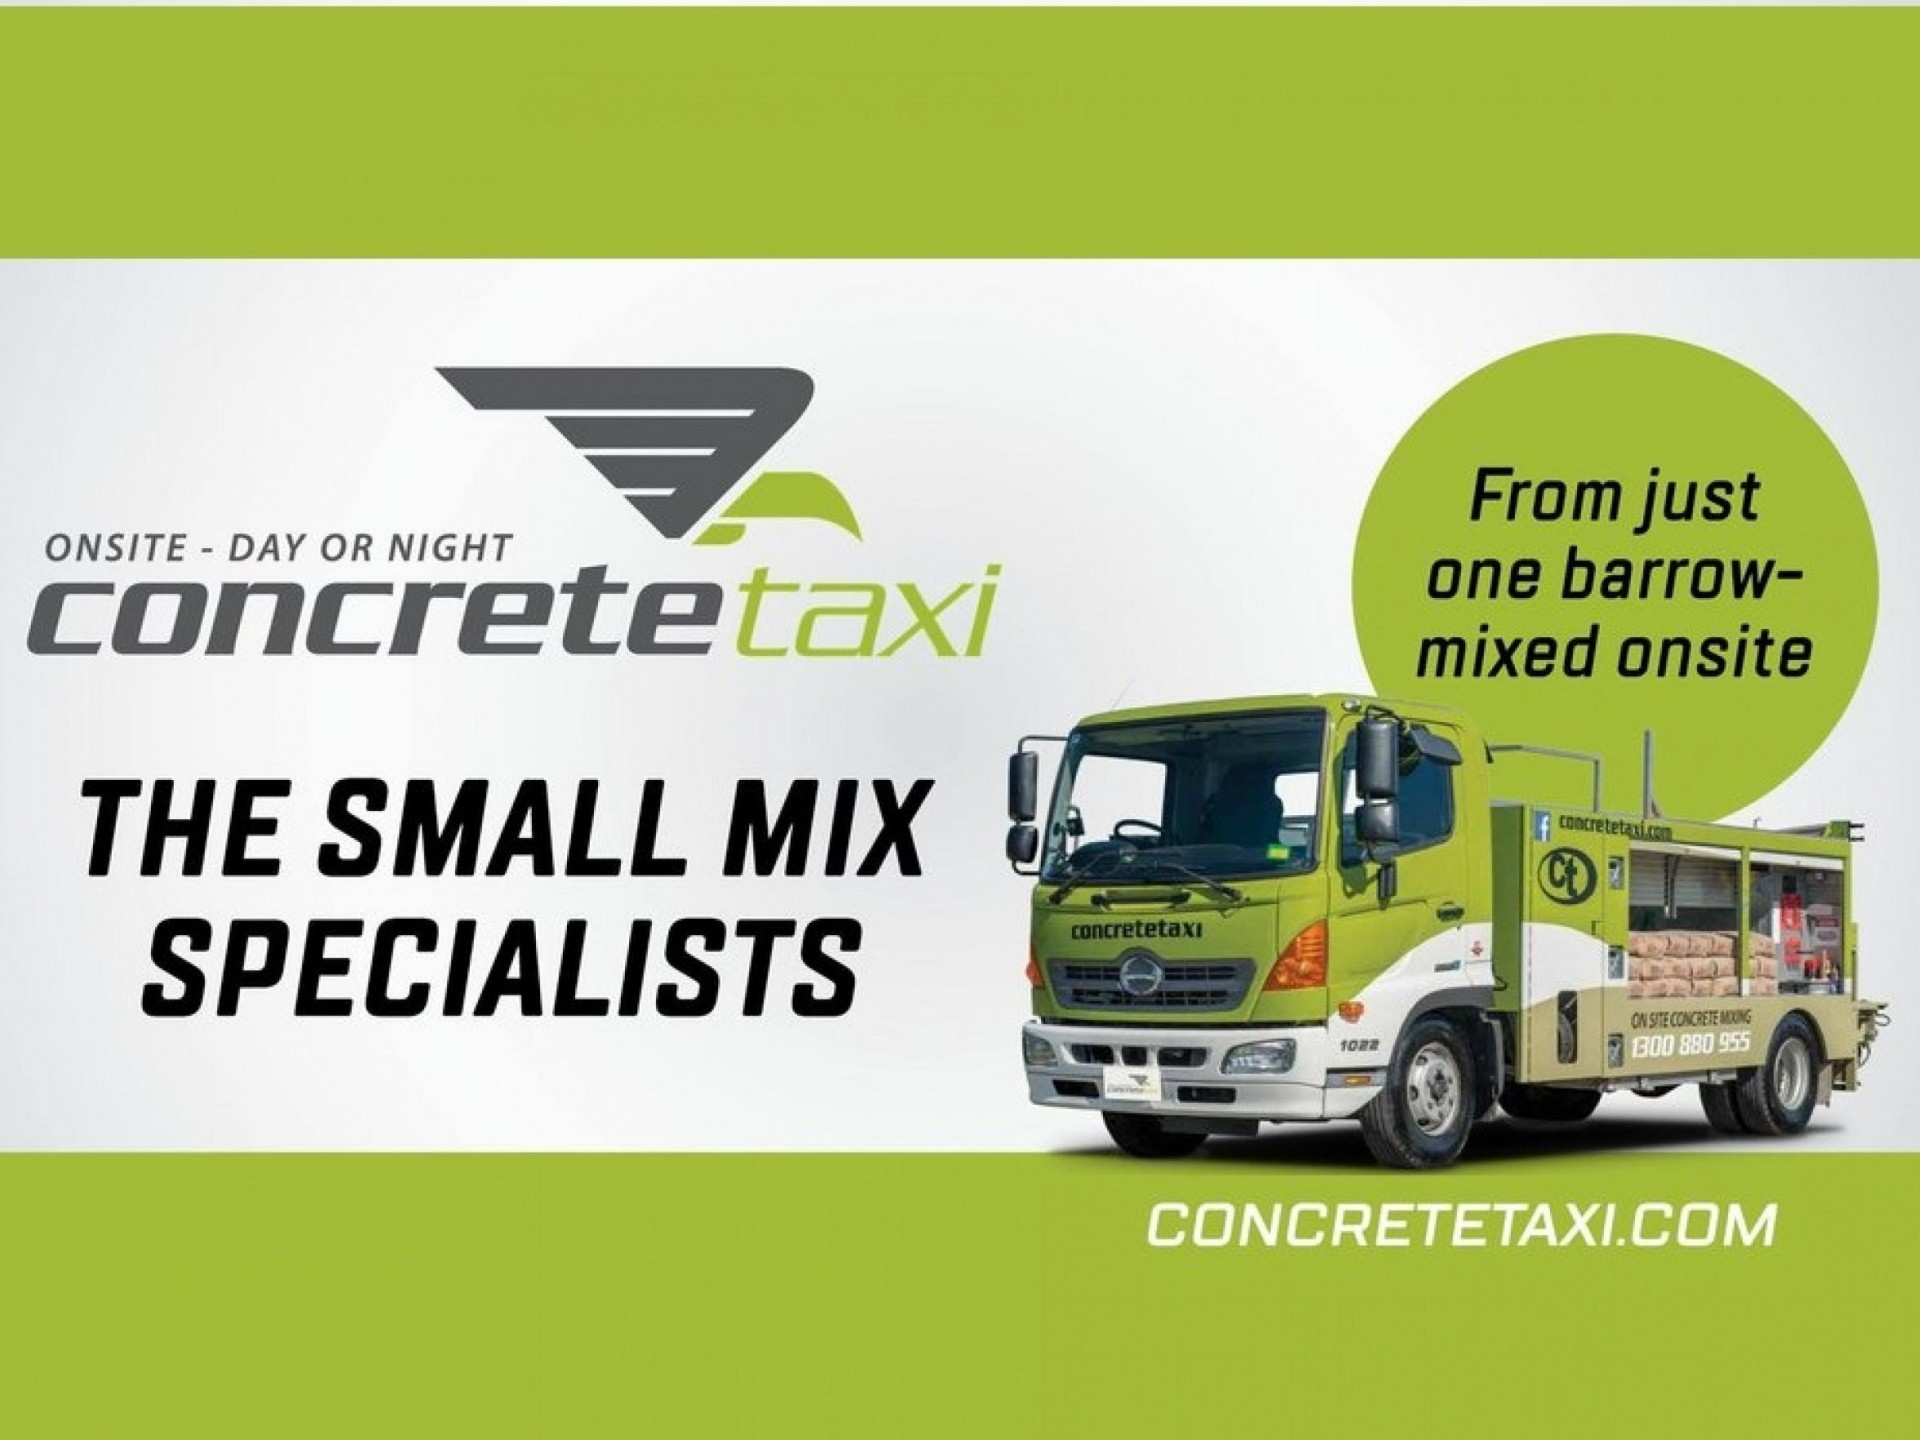 Concrete Taxi franchise - Darwin area! New Mobile Truck opportunity!...